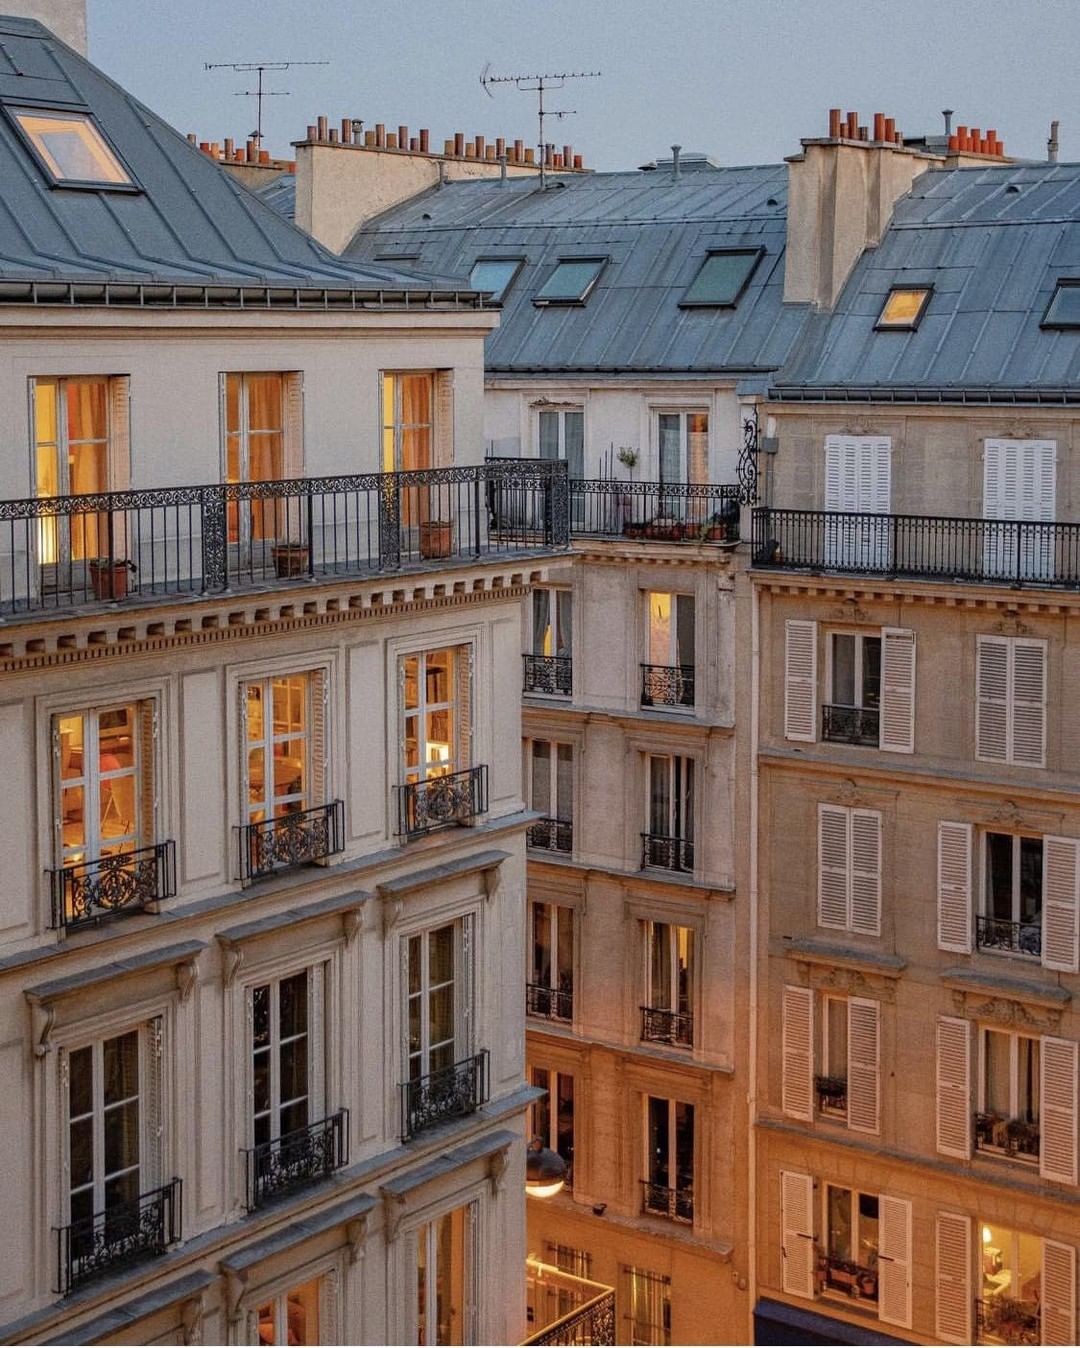 Parisian Haussmann building views from one of the top floors in Hotel Rochechouart